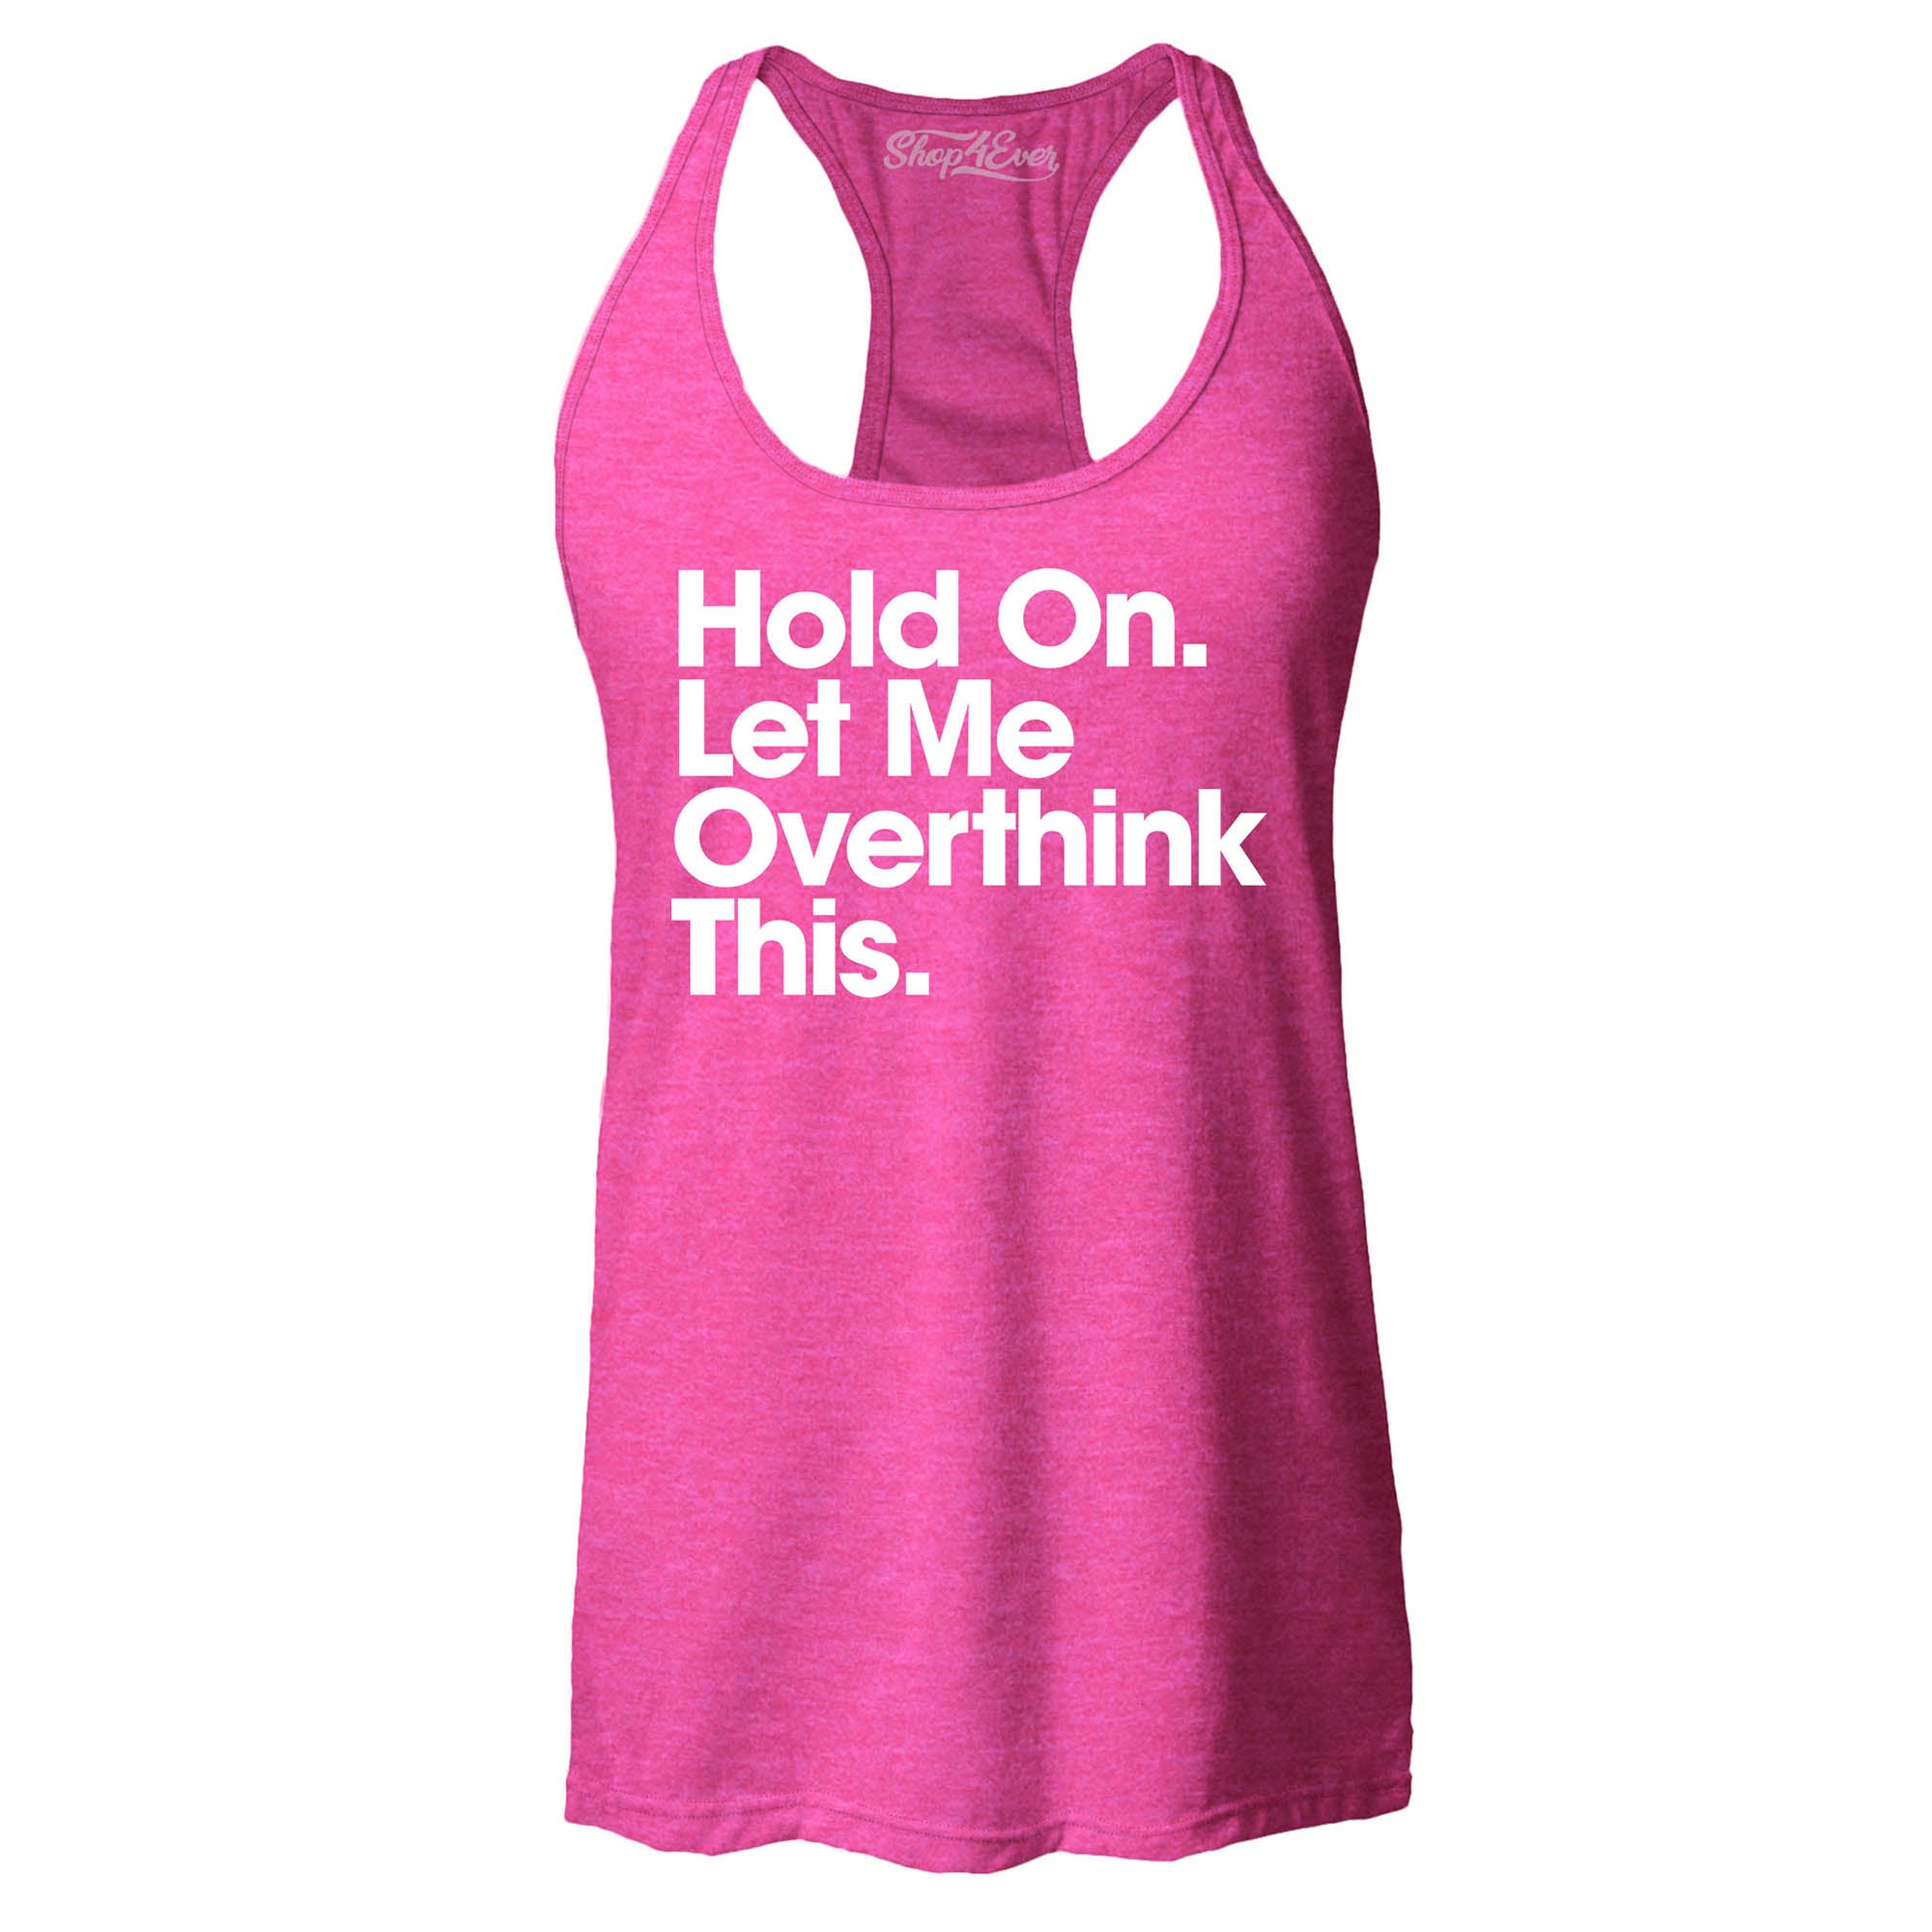 Hold On. Let Me Overthink This. Women's Racerback Tank Top Slim Fit